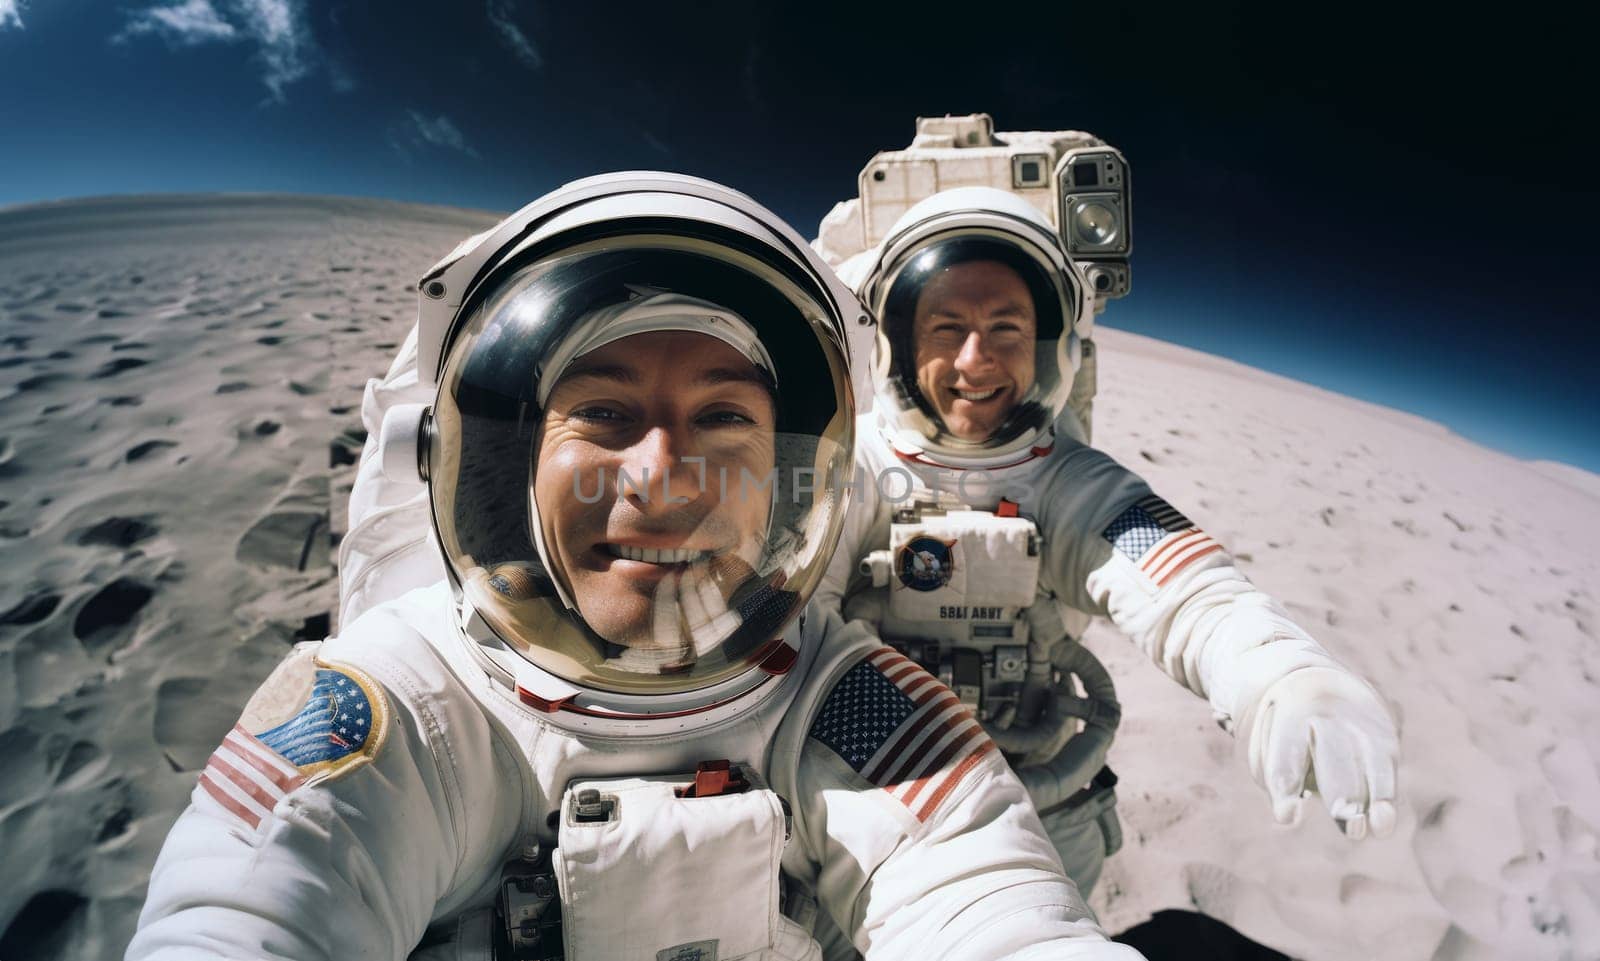 Astronauts Take a Selfie on the Moon.Generated image by dotshock